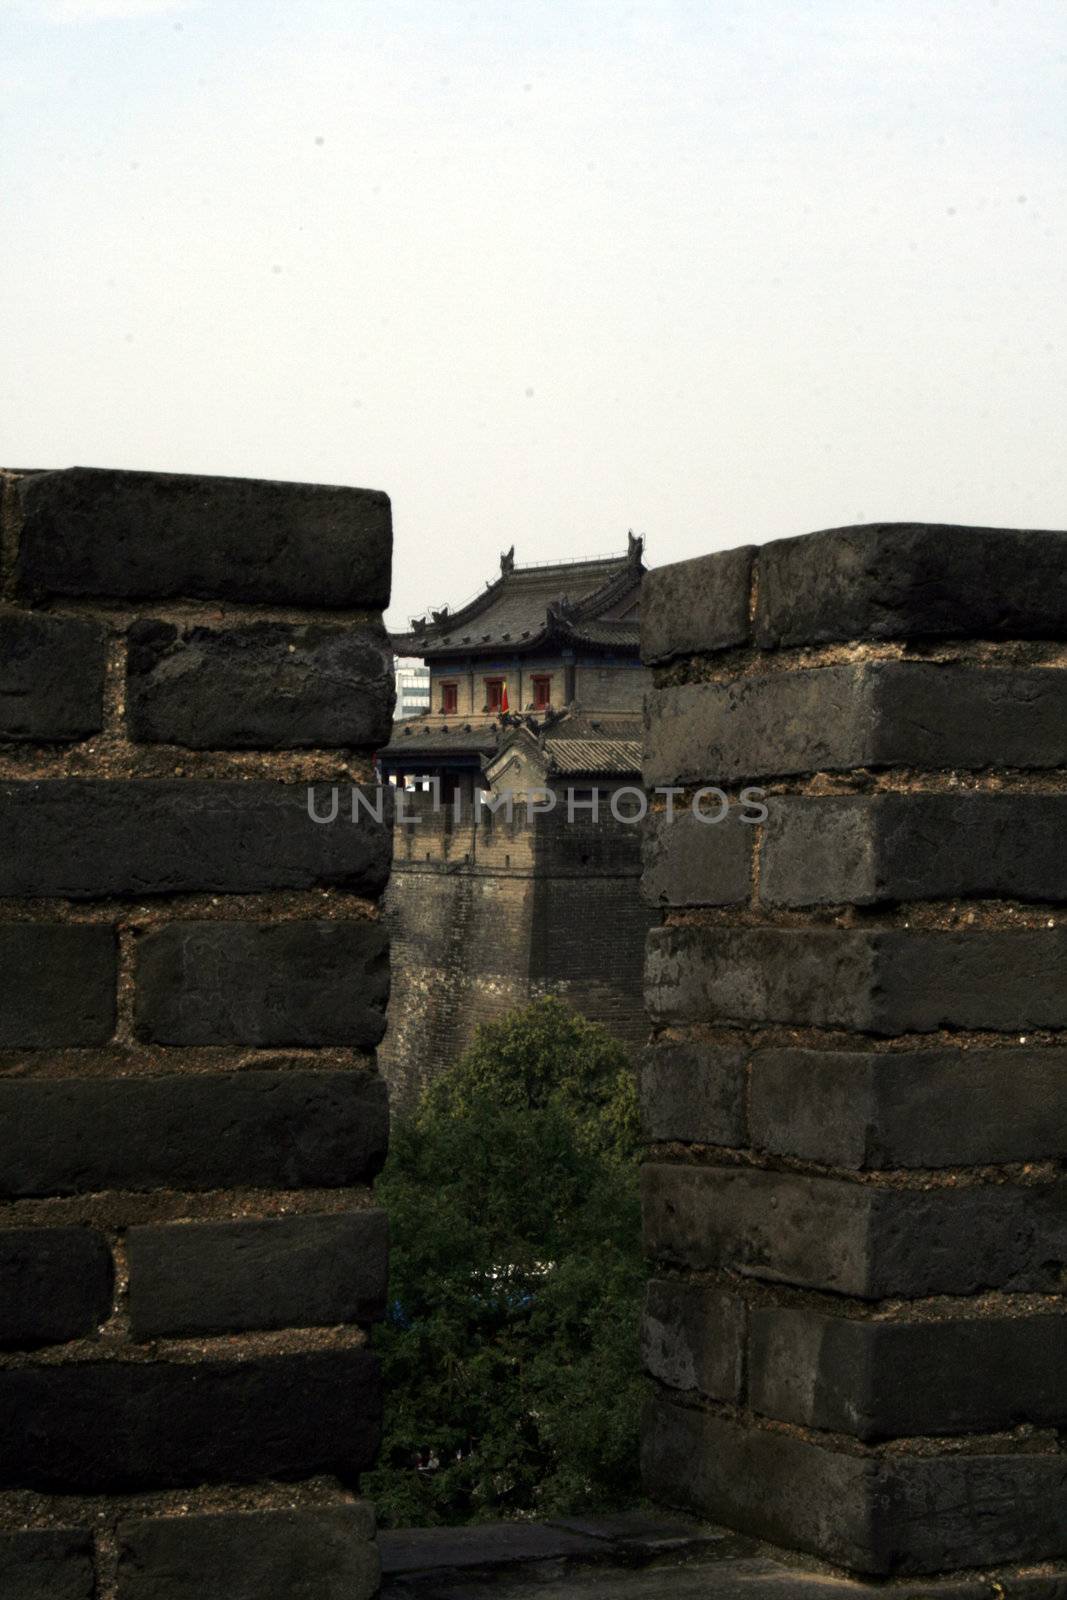 downtown of Xian, View by two pinnacles on a building